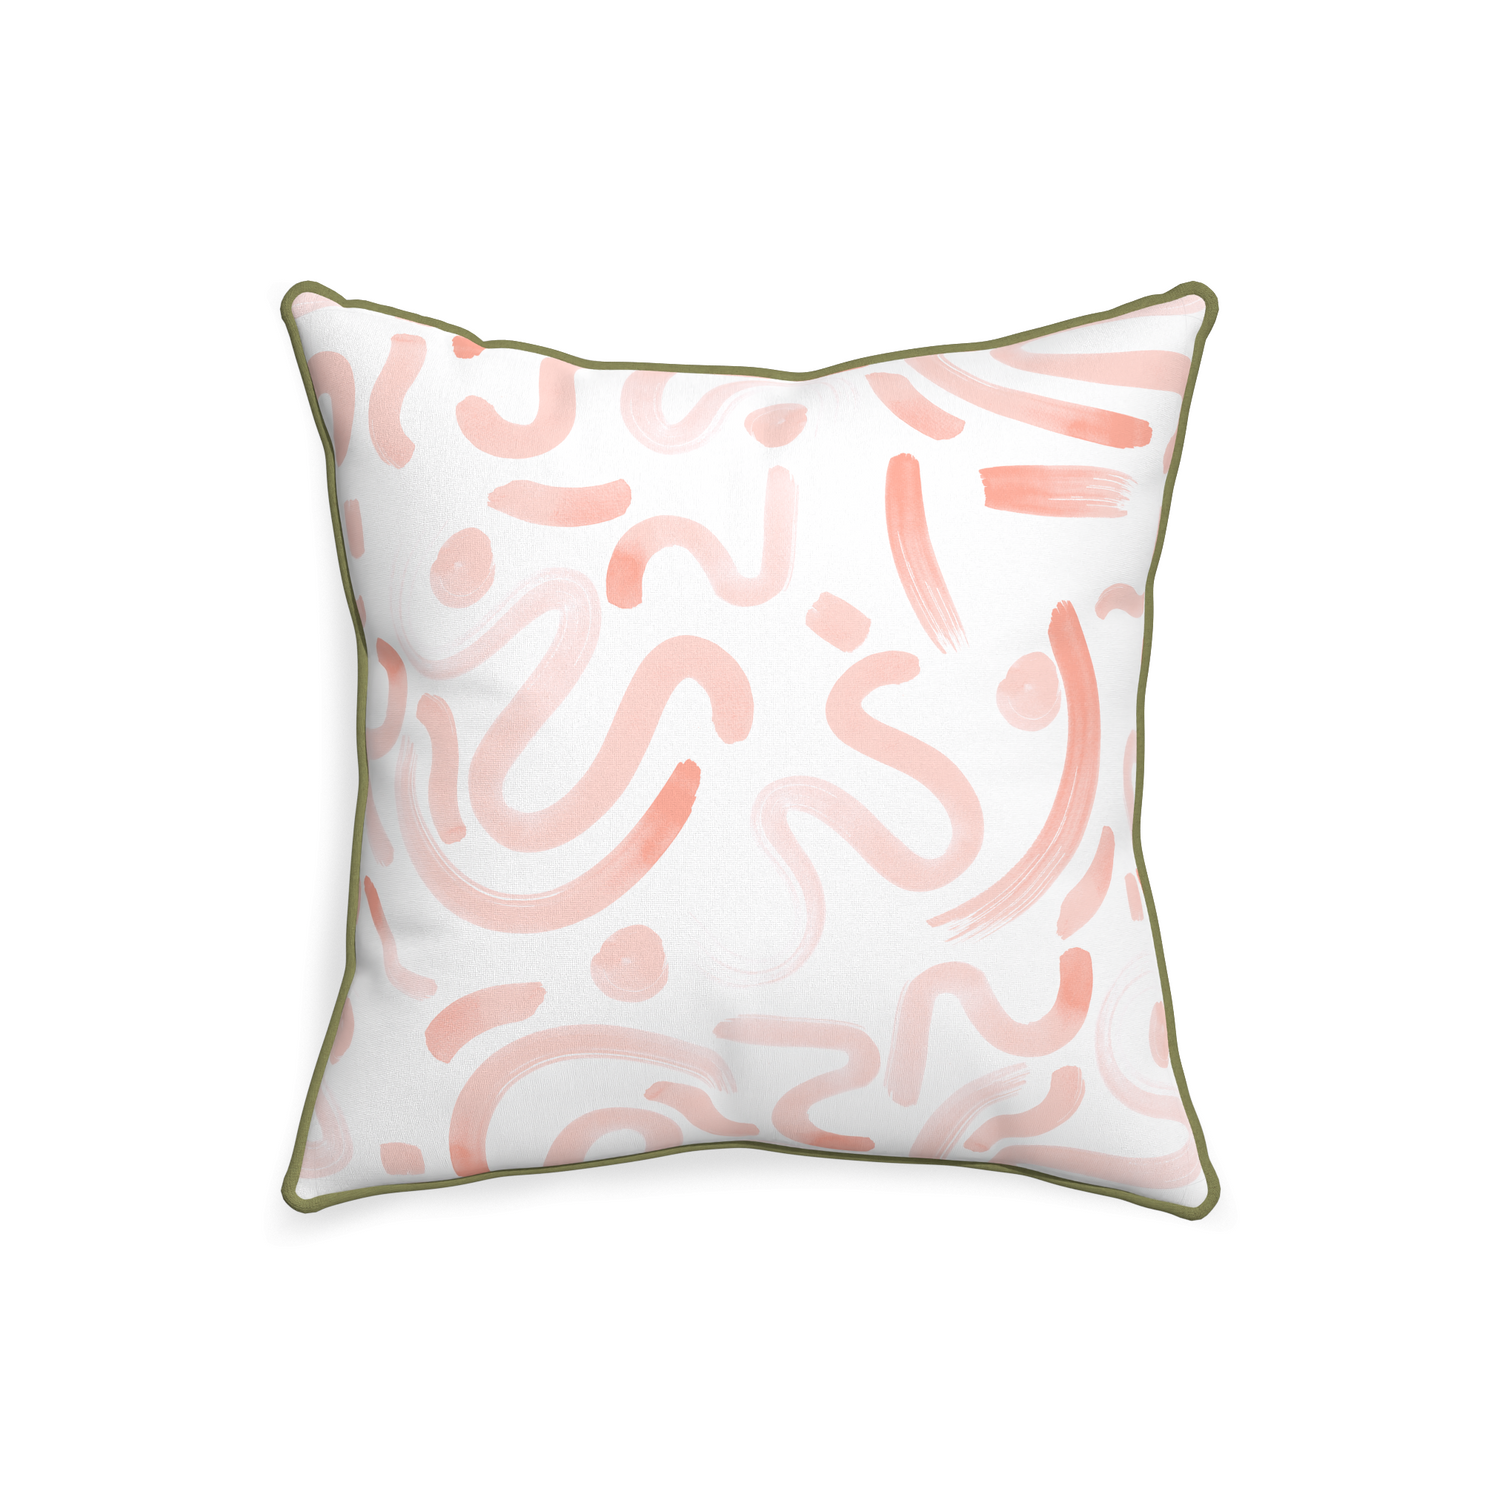 20-square hockney pink custom pink graphicpillow with moss piping on white background